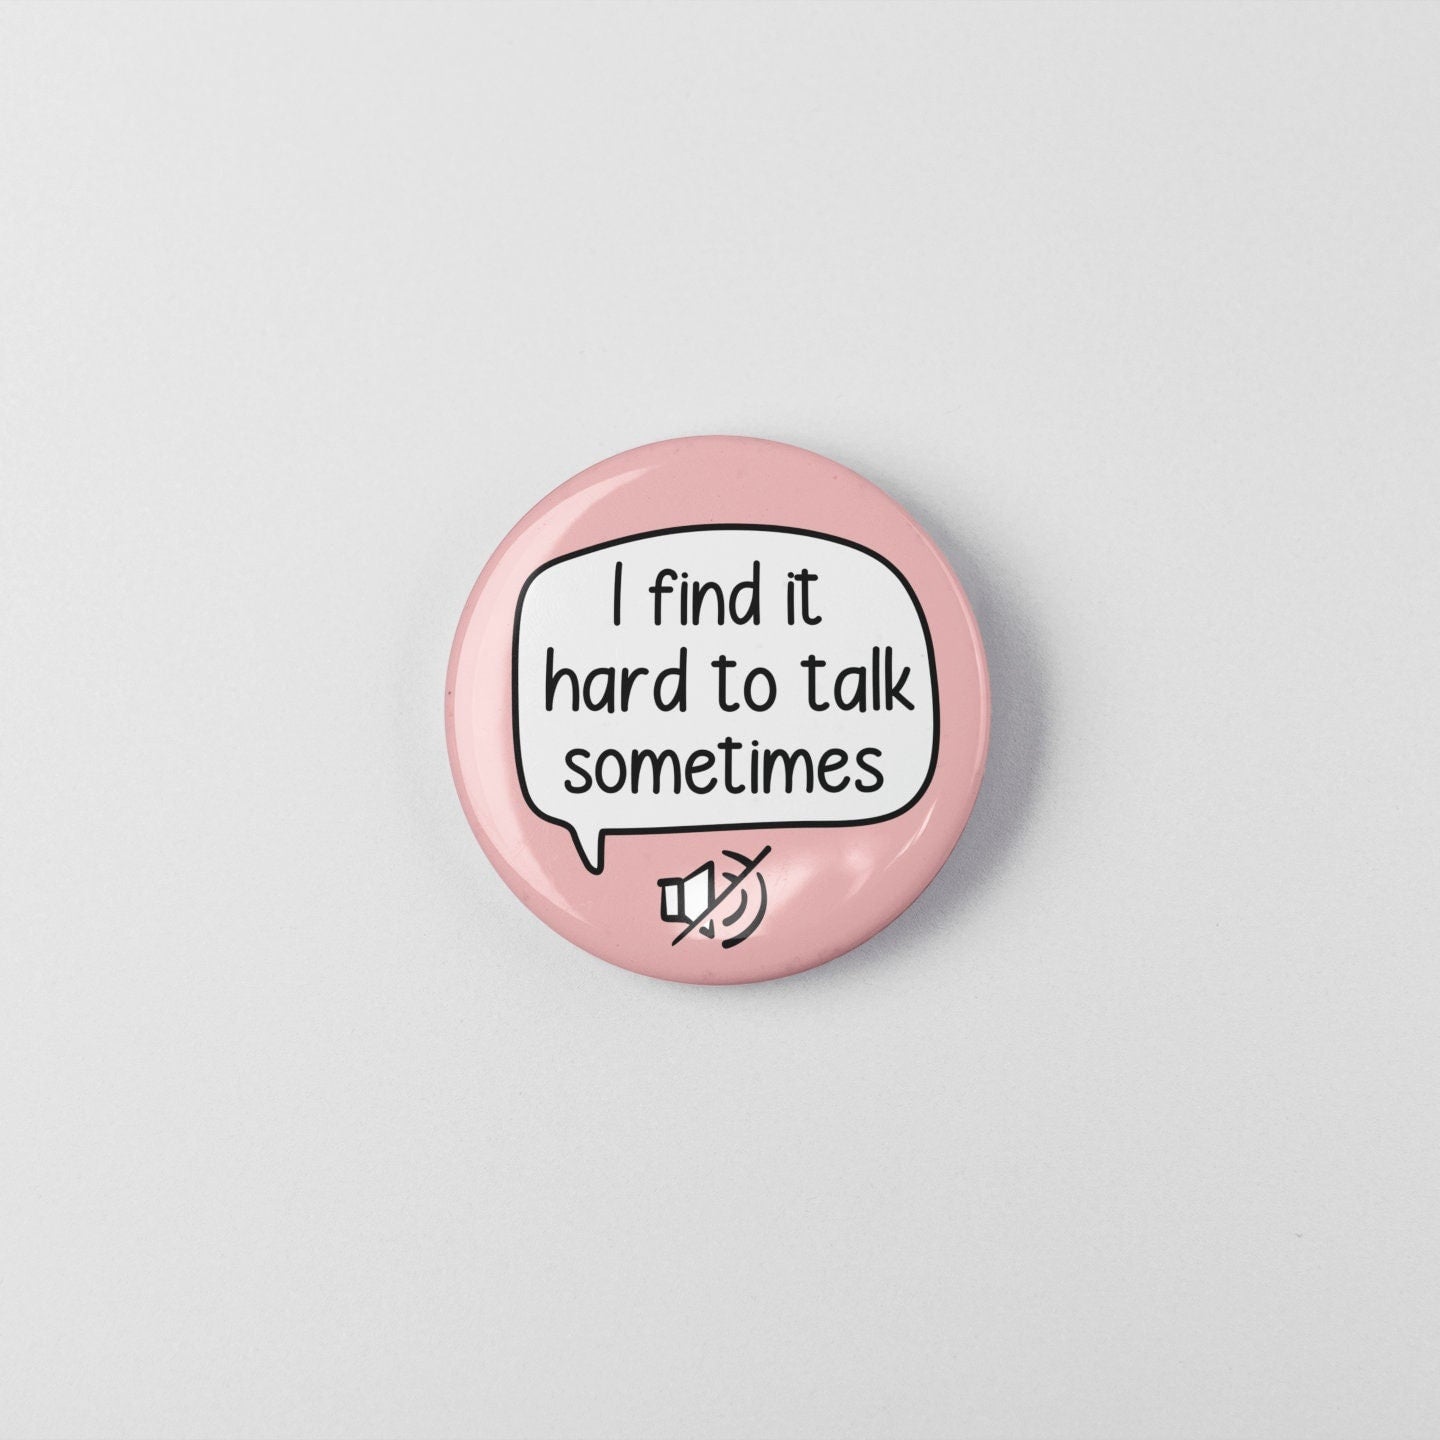 Find It Hard To Talk Sometimes Badge Pin | Non-Verbal Badge - Anxiety - Autism - Mental Health Pin